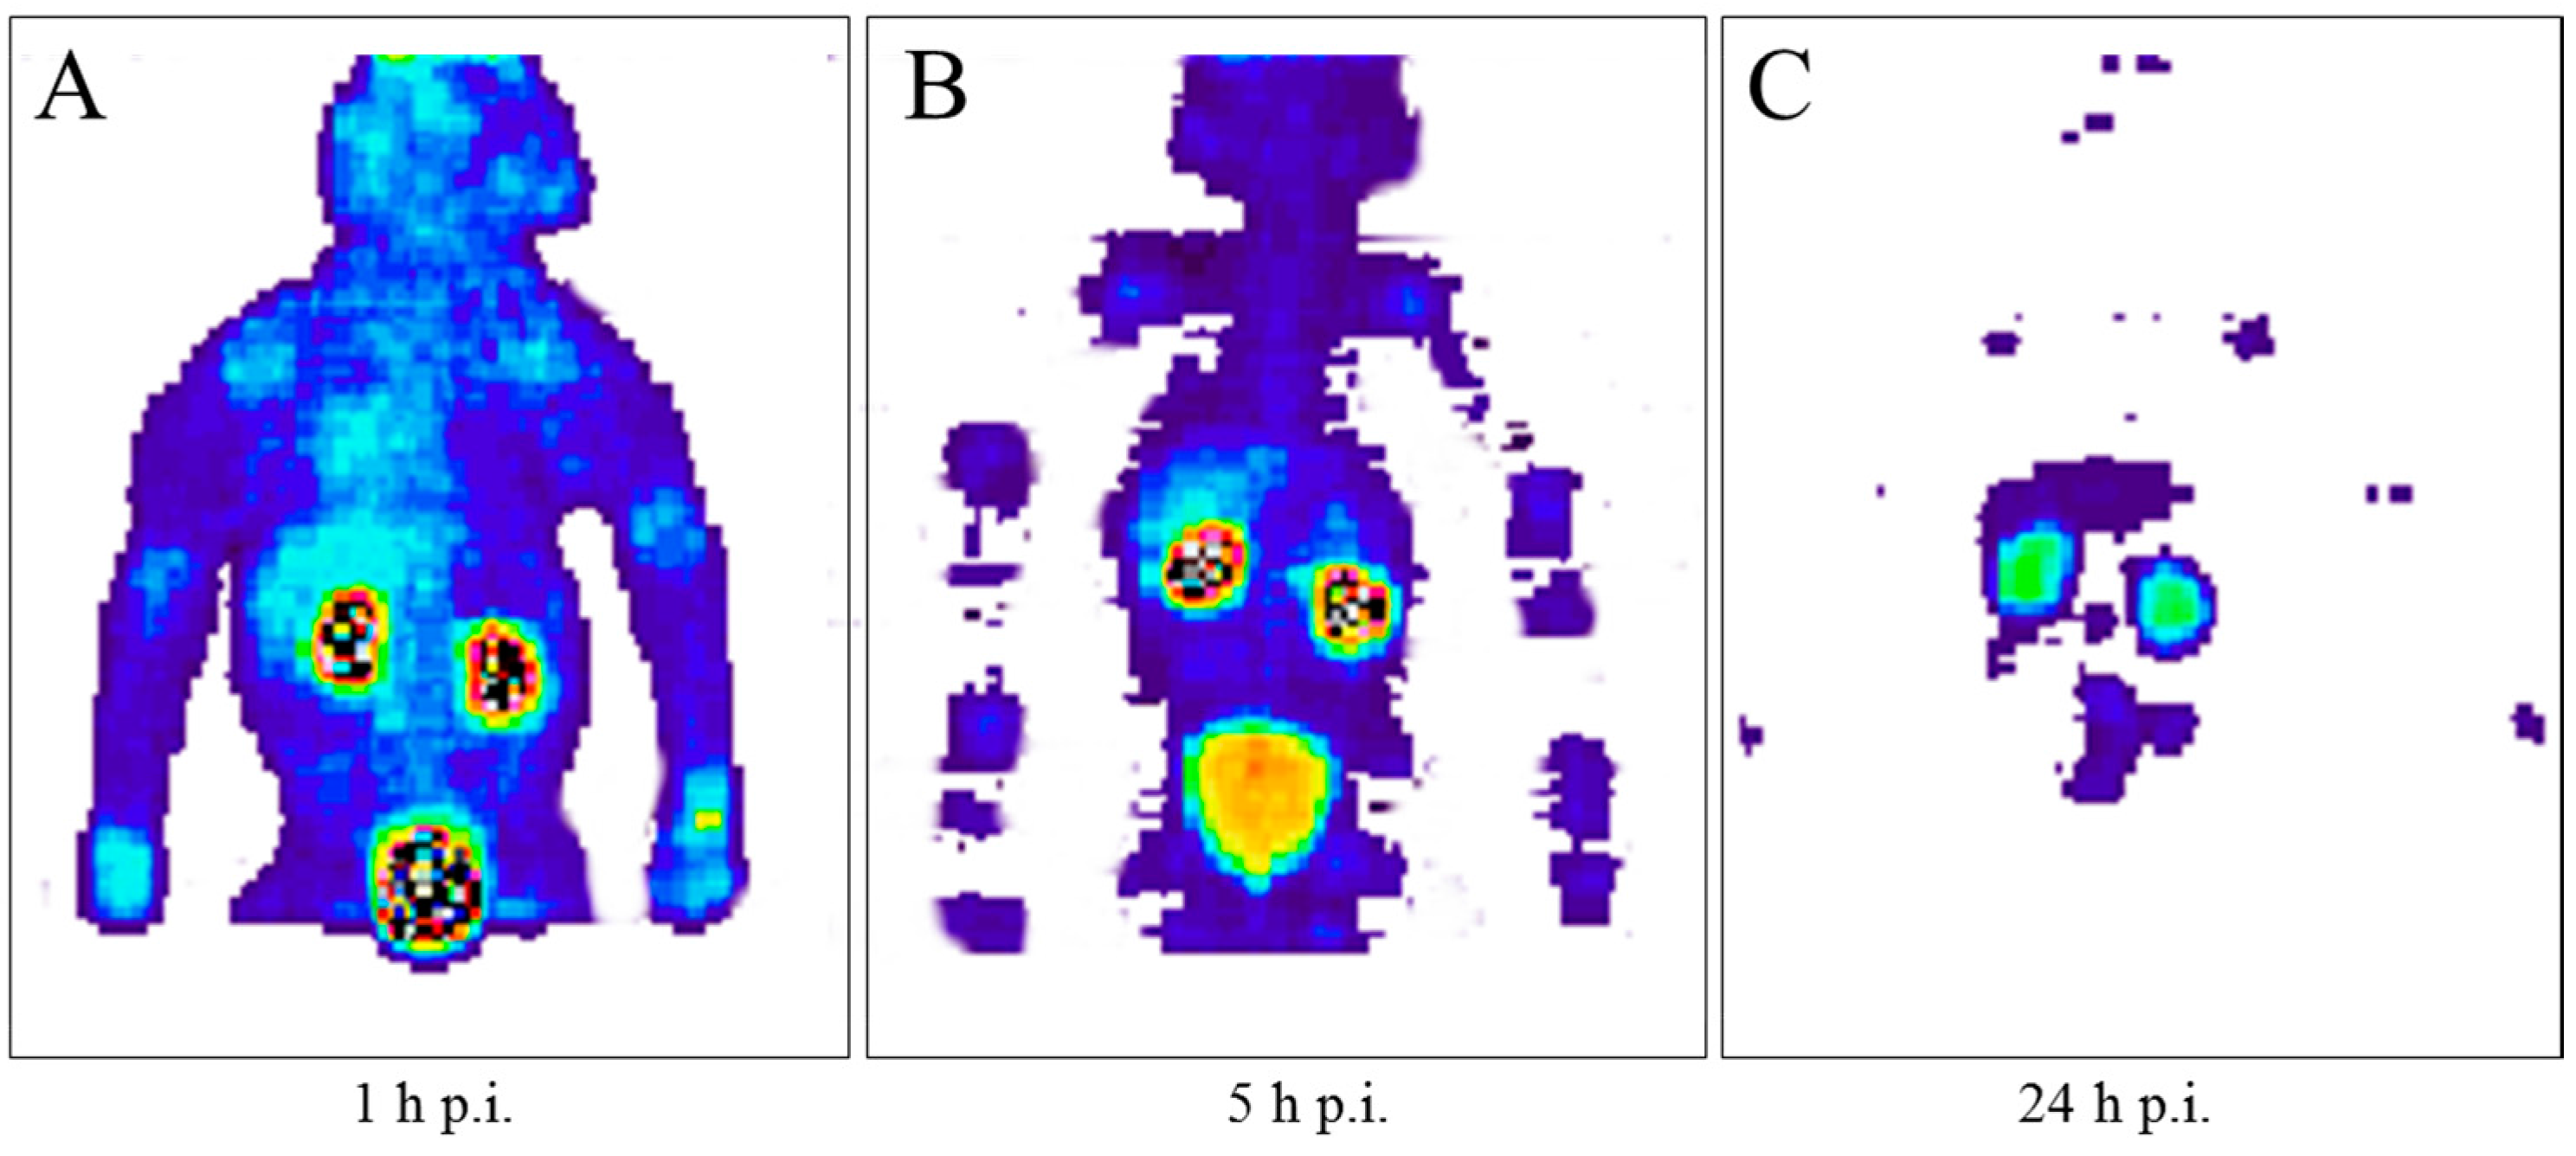 Pharmaceuticals Free Full Text The Beginning And Development Of The Theranostic Approach In Nuclear Medicine As Exemplified By The Radionuclide Pair 86y And 90y Html